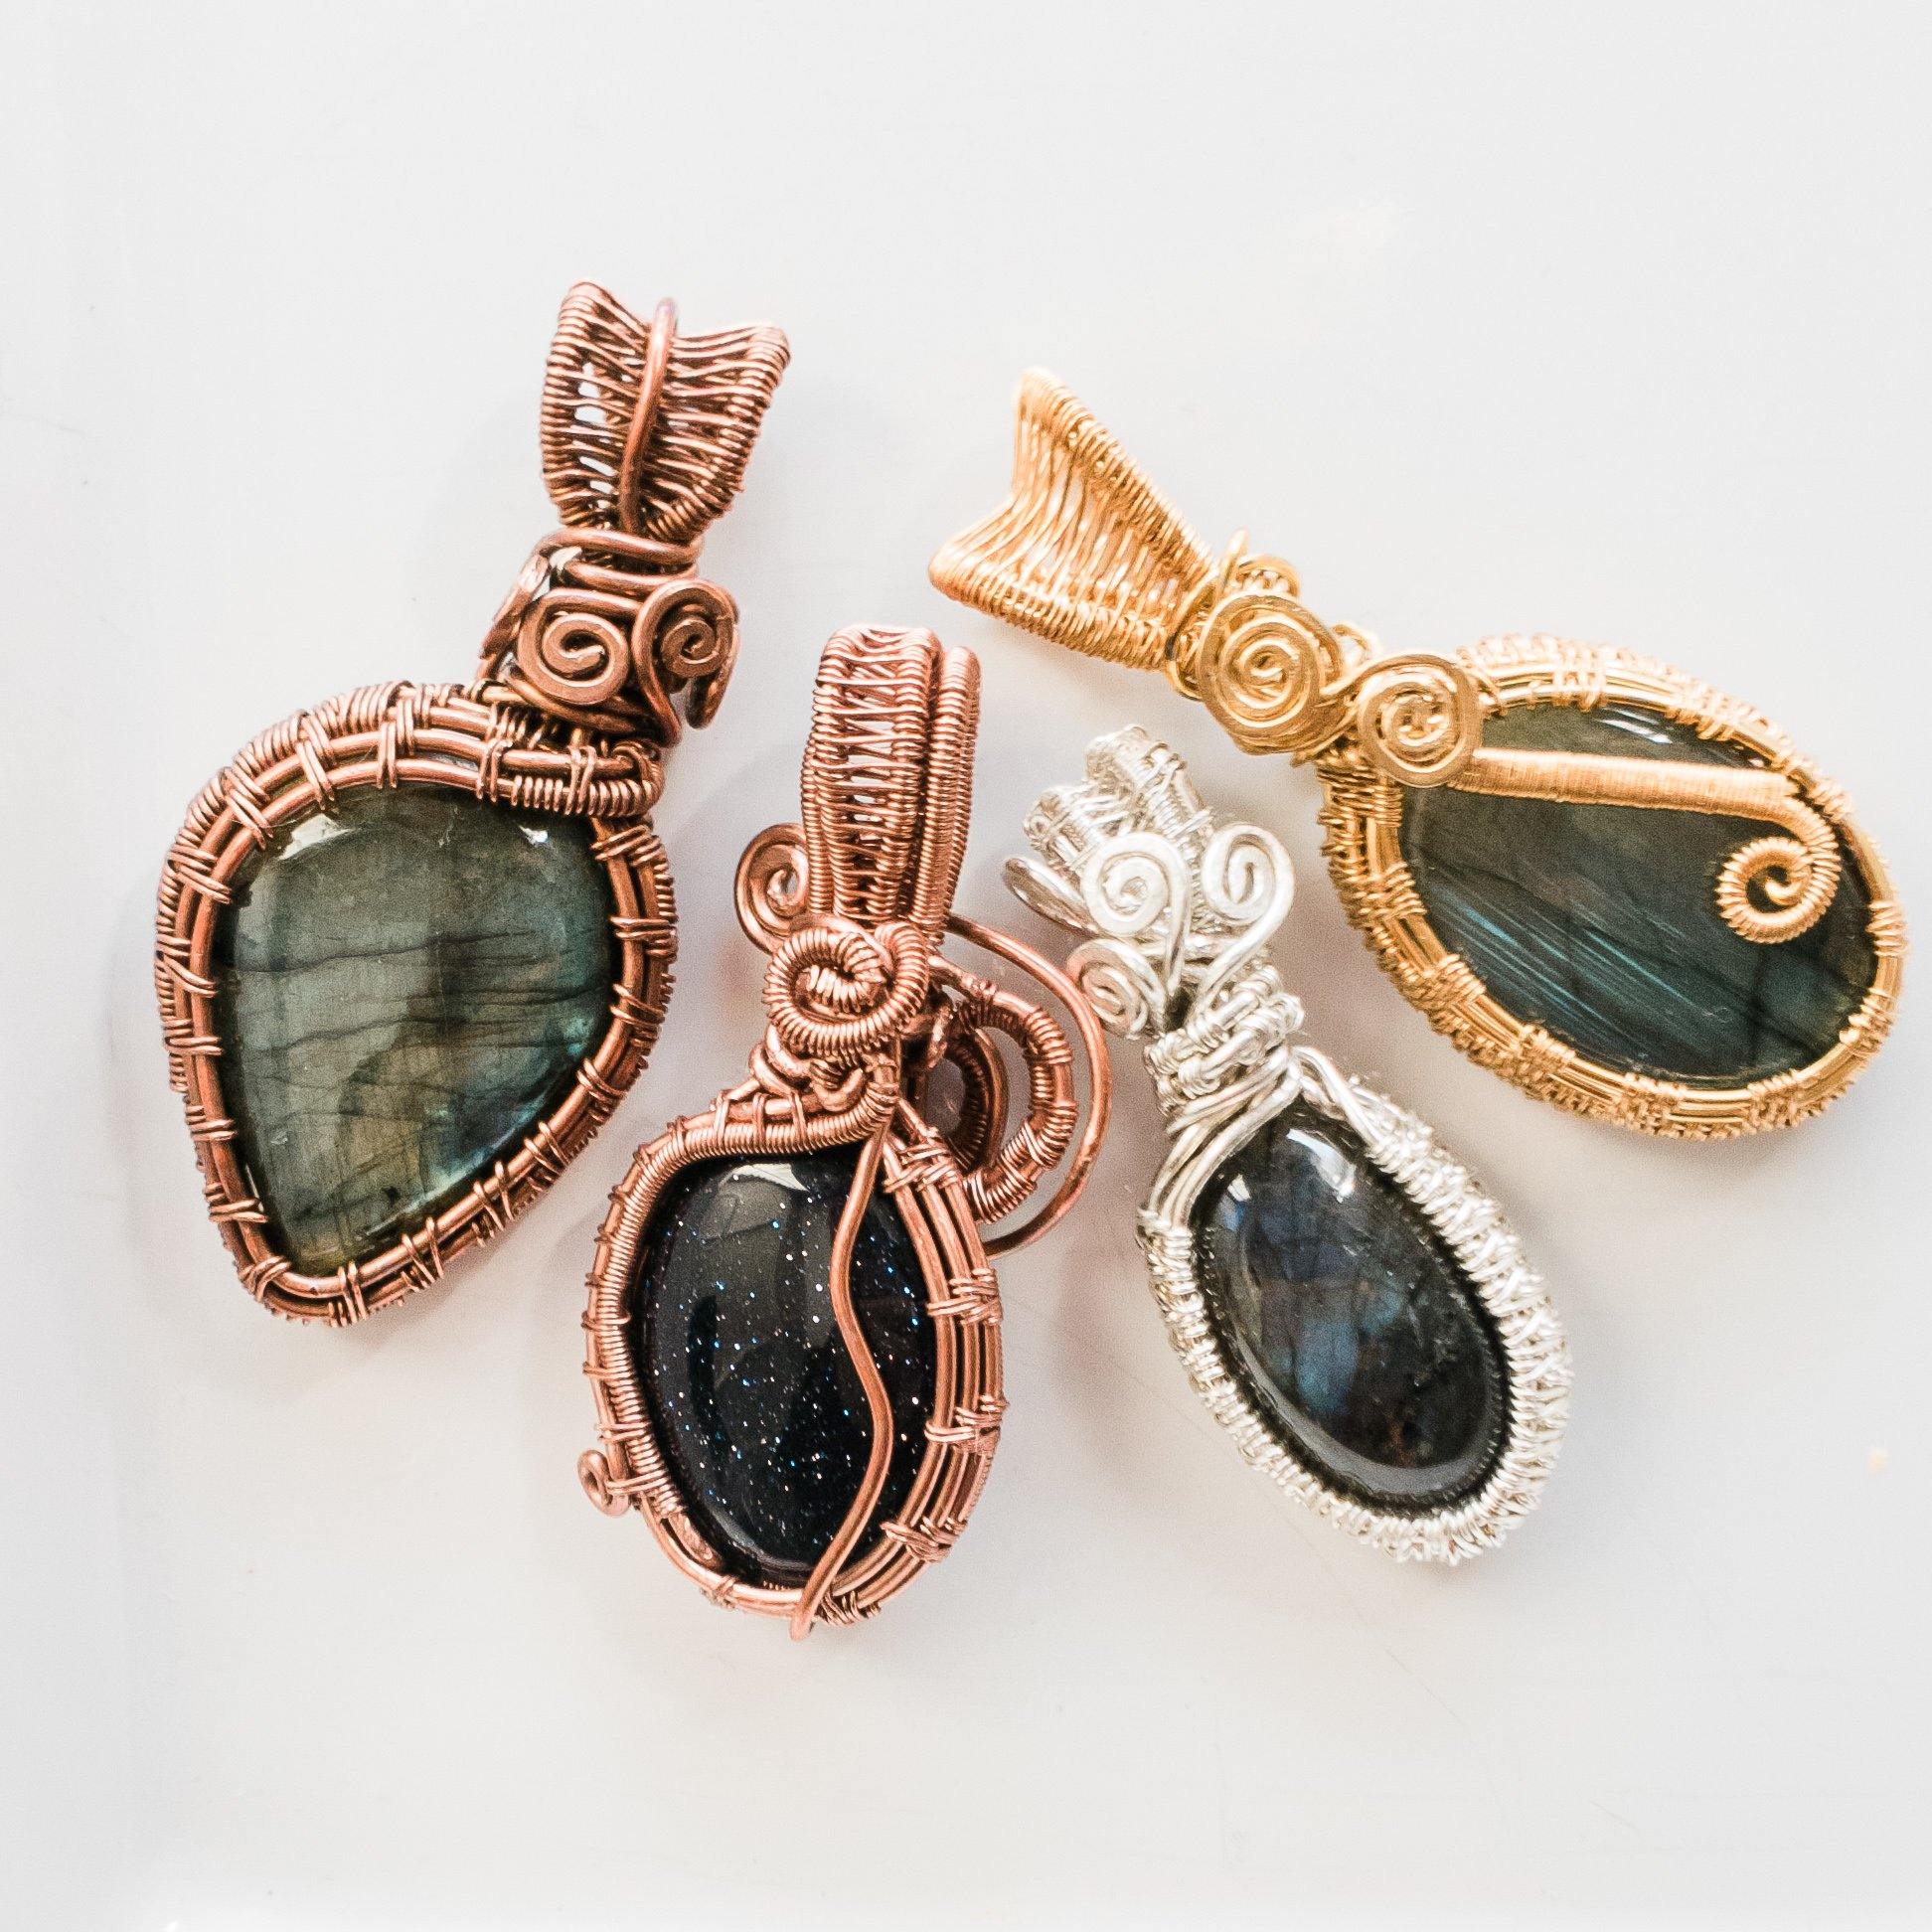 Group picture of Beautiful Labradorite Pendants in Sterling Silver, Antique Copper and Bronze - BellaChel Jeweler